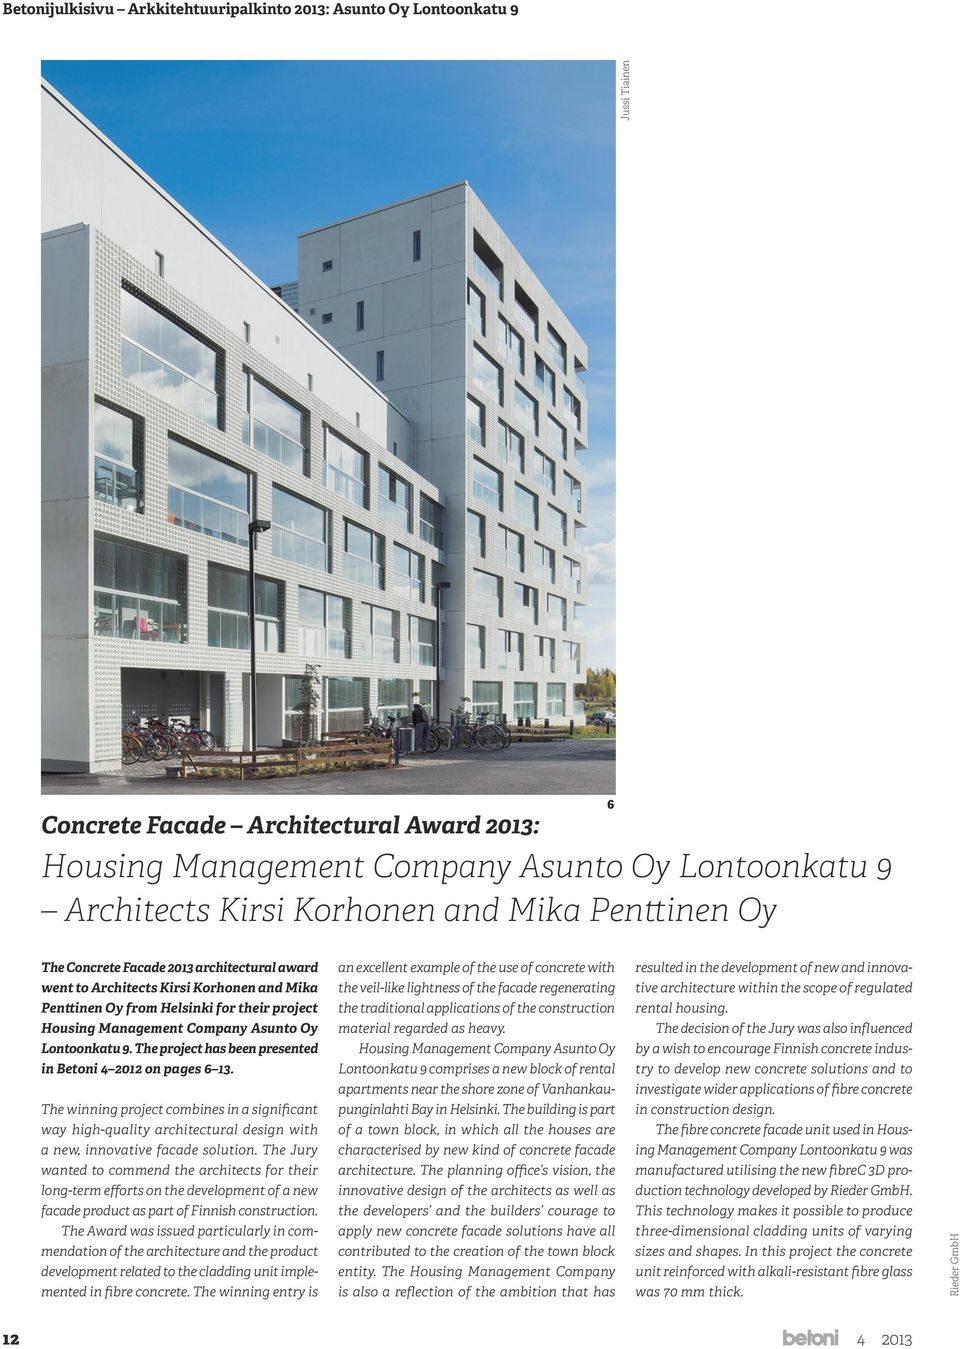 The project has been presented in Betoni 4 2012 on pages 6 13. The winning project combines in a significant way high-quality architectural design with a new, innovative facade solution.